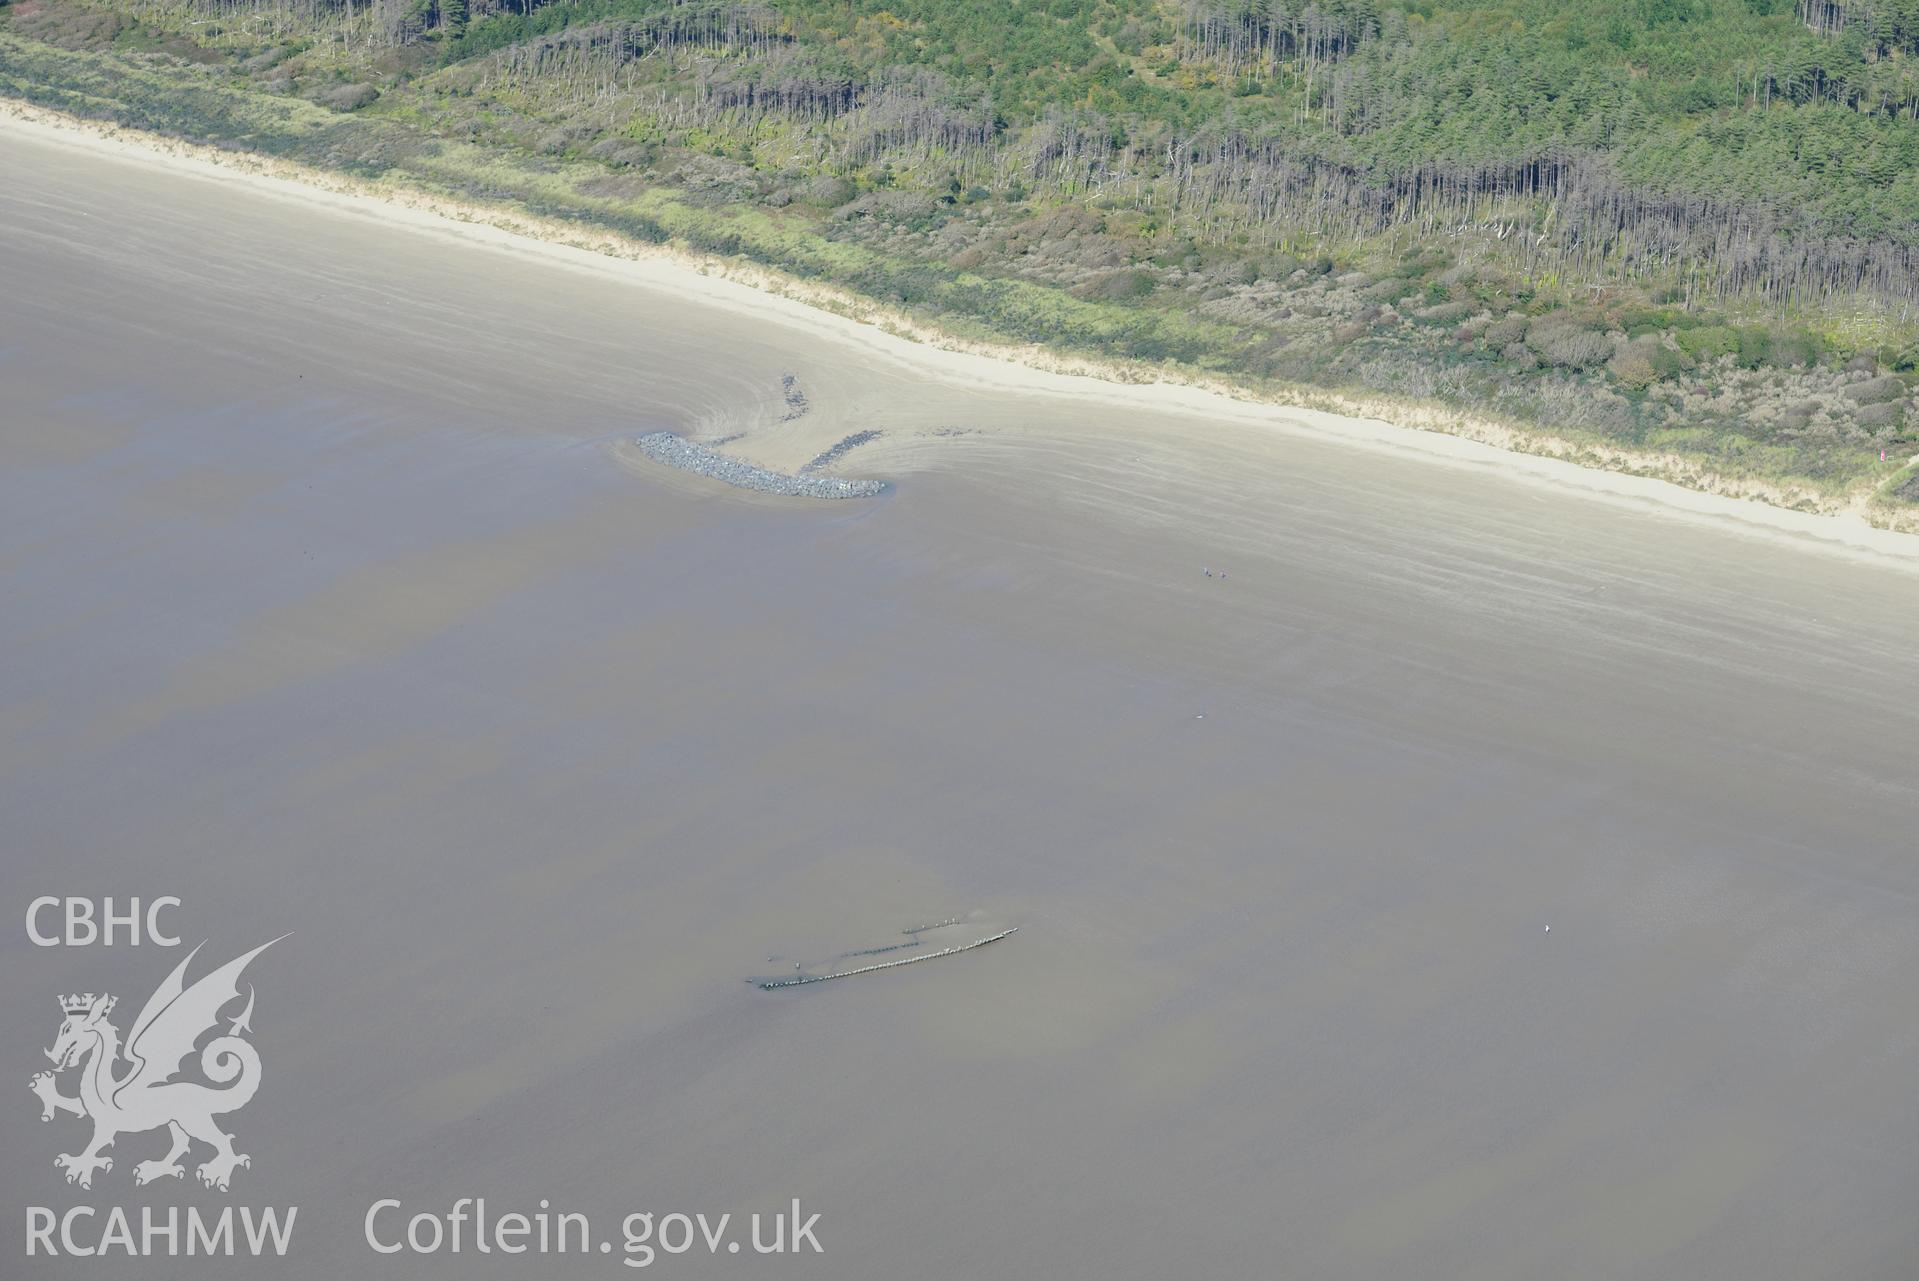 An unnamed wreck on the southern part of the Cefn Sidan Sands near Pembrey, Llanelli. Oblique aerial photograph taken during the Royal Commission's programme of archaeological aerial reconnaissance by Toby Driver on 30th September 2015.